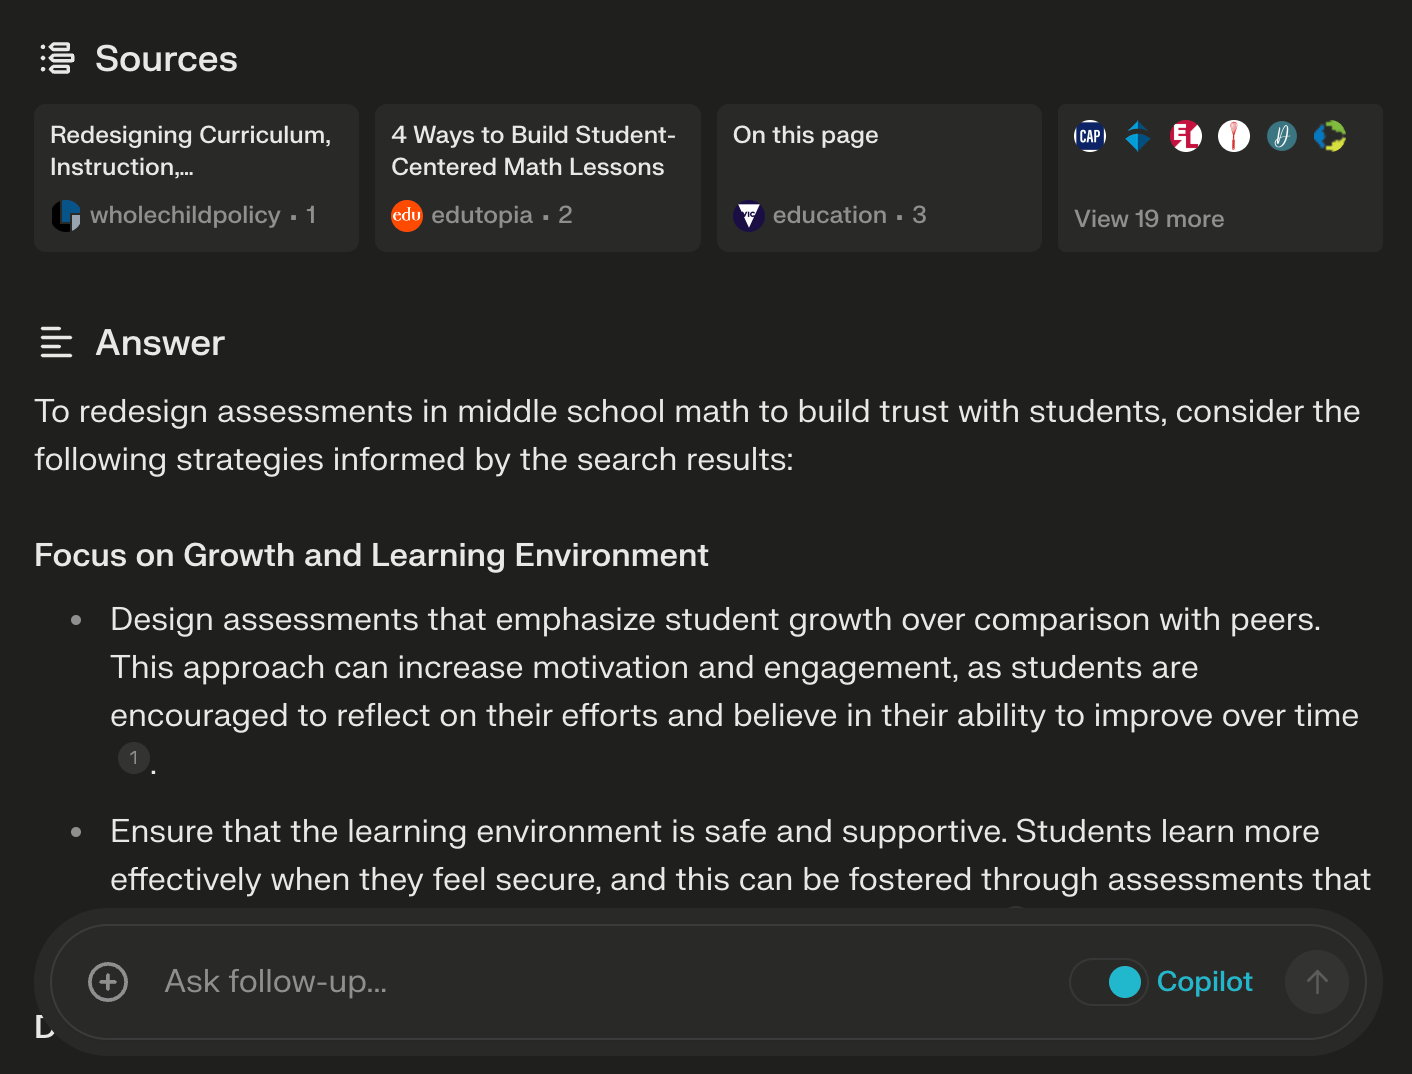 The image shows a screenshot of an application or web interface with a section labeled "Answer" detailing strategies to redesign assessments in middle school math to build trust with students. The answer suggests focusing on growth and the learning environment, with specific strategies such as designing assessments to emphasize student growth over peer comparison and ensuring a safe and supportive learning environment.  There is a sidebar titled "Sources" listing resources that the information may have been drawn from, including "Redesigning Curriculum, Instruction..." from a source labeled "wholechildpolicy - 1" and "4 Ways to Build Student-Centered Math Lessons" from "edutopia - 2." Another resource labeled "education - 3" appears below with the option to view 19 more sources.  The interface also has an "Ask follow-up" prompt at the bottom, suggesting that the user can interact further with the Copilot feature, perhaps to get more detailed information or clarification on the topic. Additionally, various sharing and bookmarking icons are visible at the top right of the interface, indicating the content can be shared or saved for later reference.